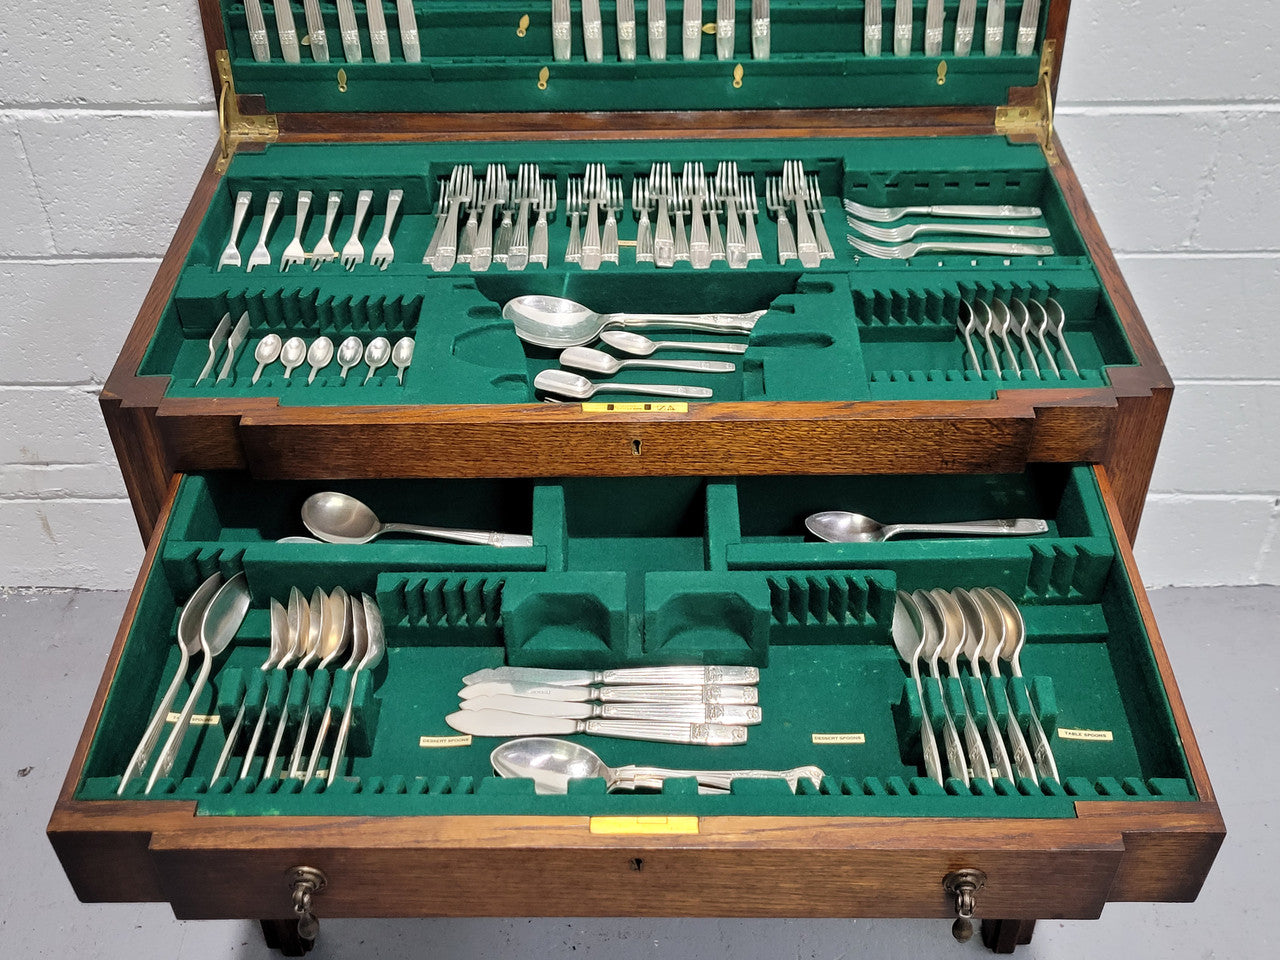 English Oak beautifully fitted cutlery table with a lift up top and drawer. Contains extensive silver plate part cutlery service by Elkington. In good original condition.